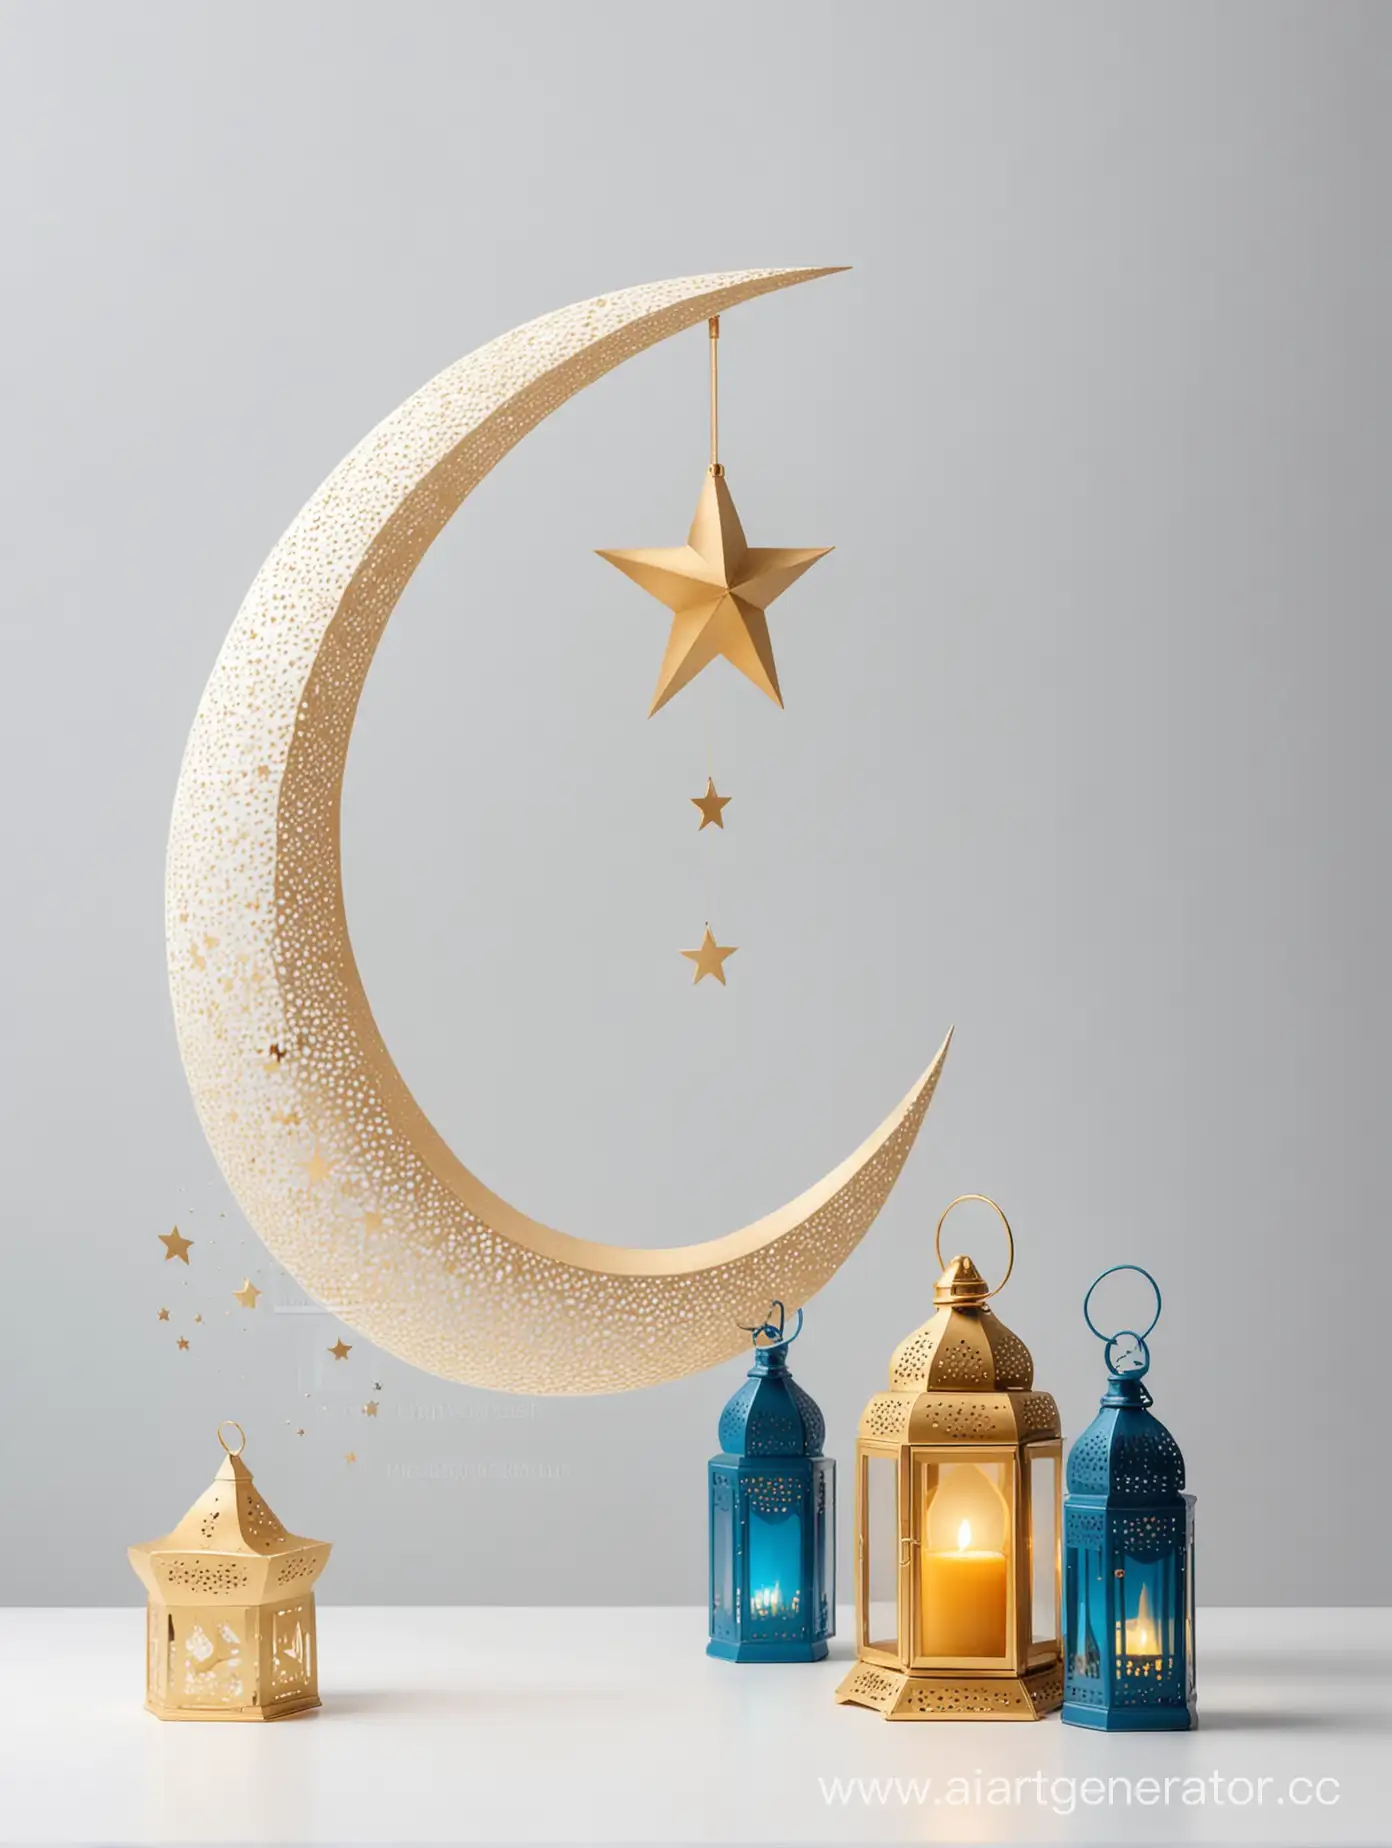 Islamic Ramadan  moon, star and lantern modern concept golden and BLUE ON white background